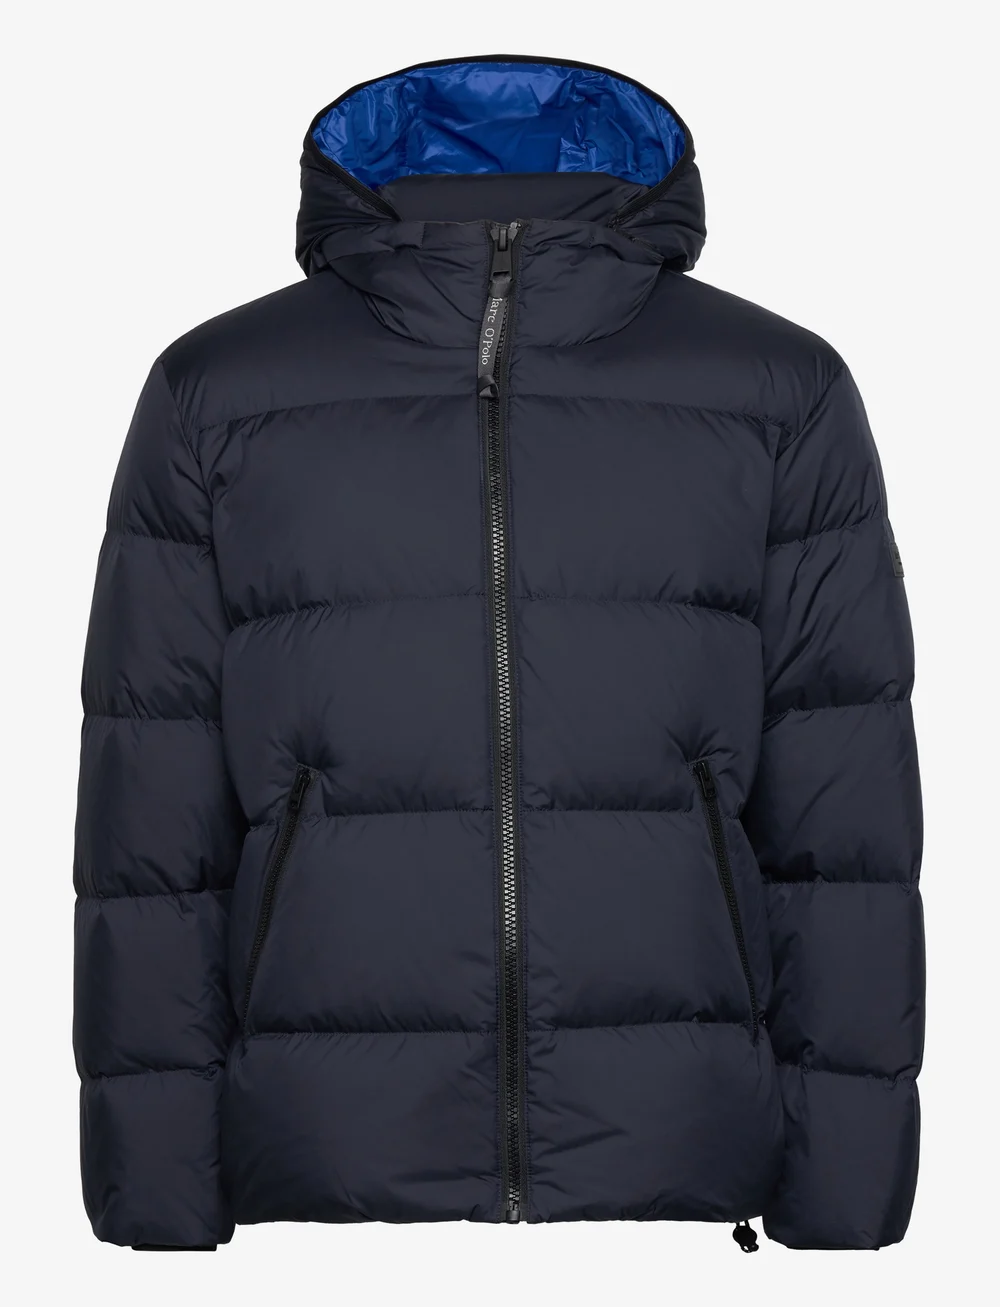 Marc O\'Polo Woven Outdoor Jackets - 194.97 €. Buy Padded jackets from Marc  O\'Polo online at Boozt.com. Fast delivery and easy returns